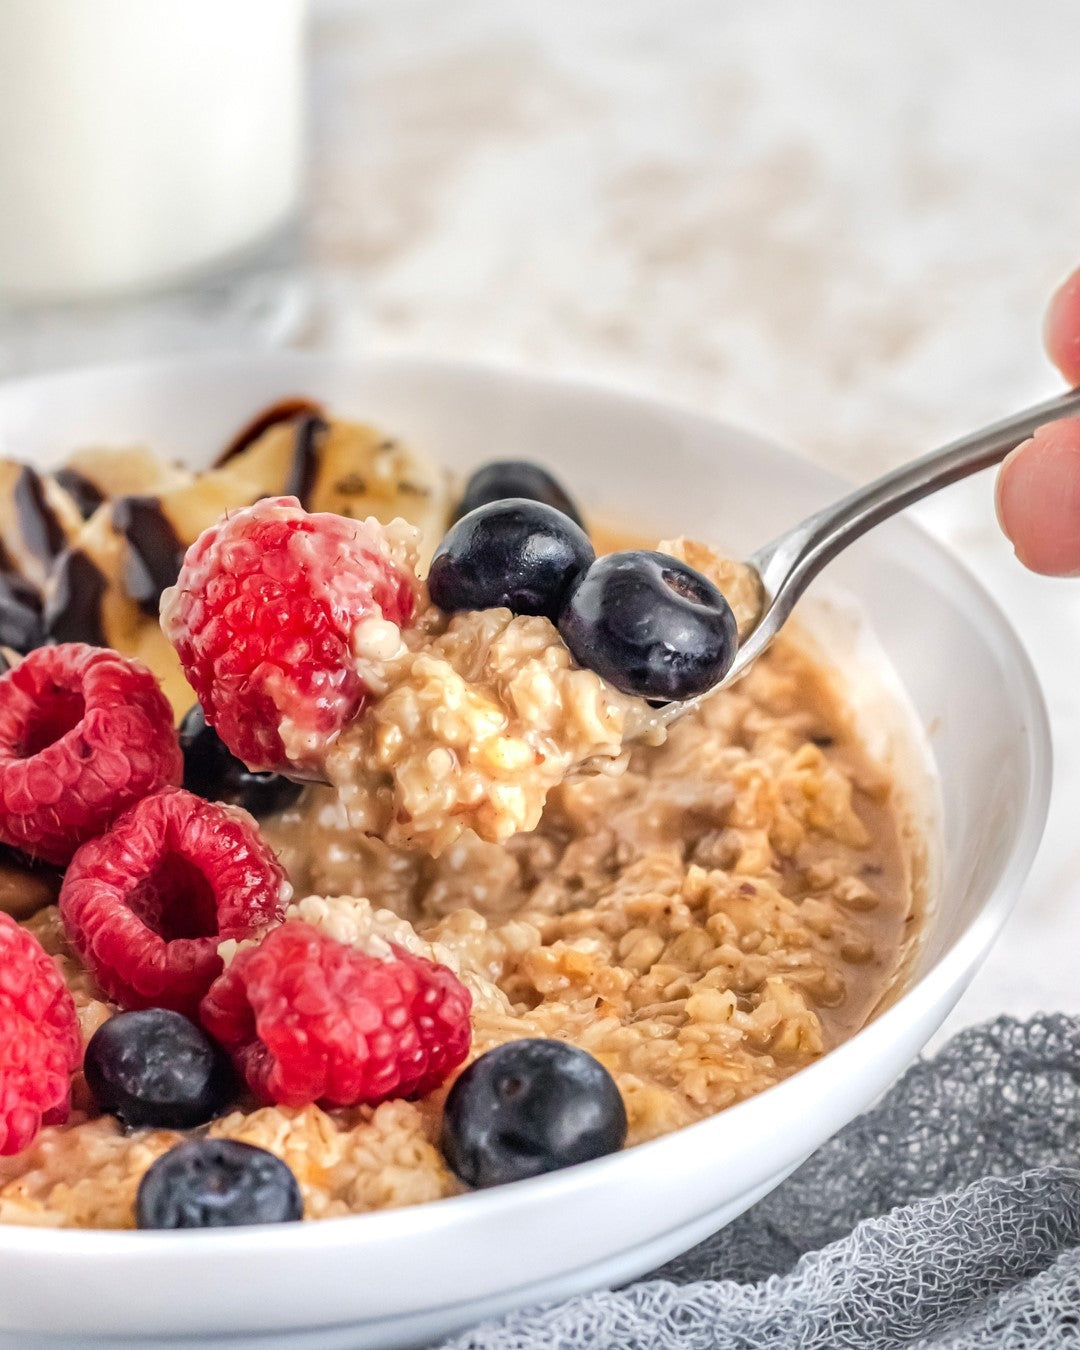 Can Oatmeal Increase Your Body Fat?